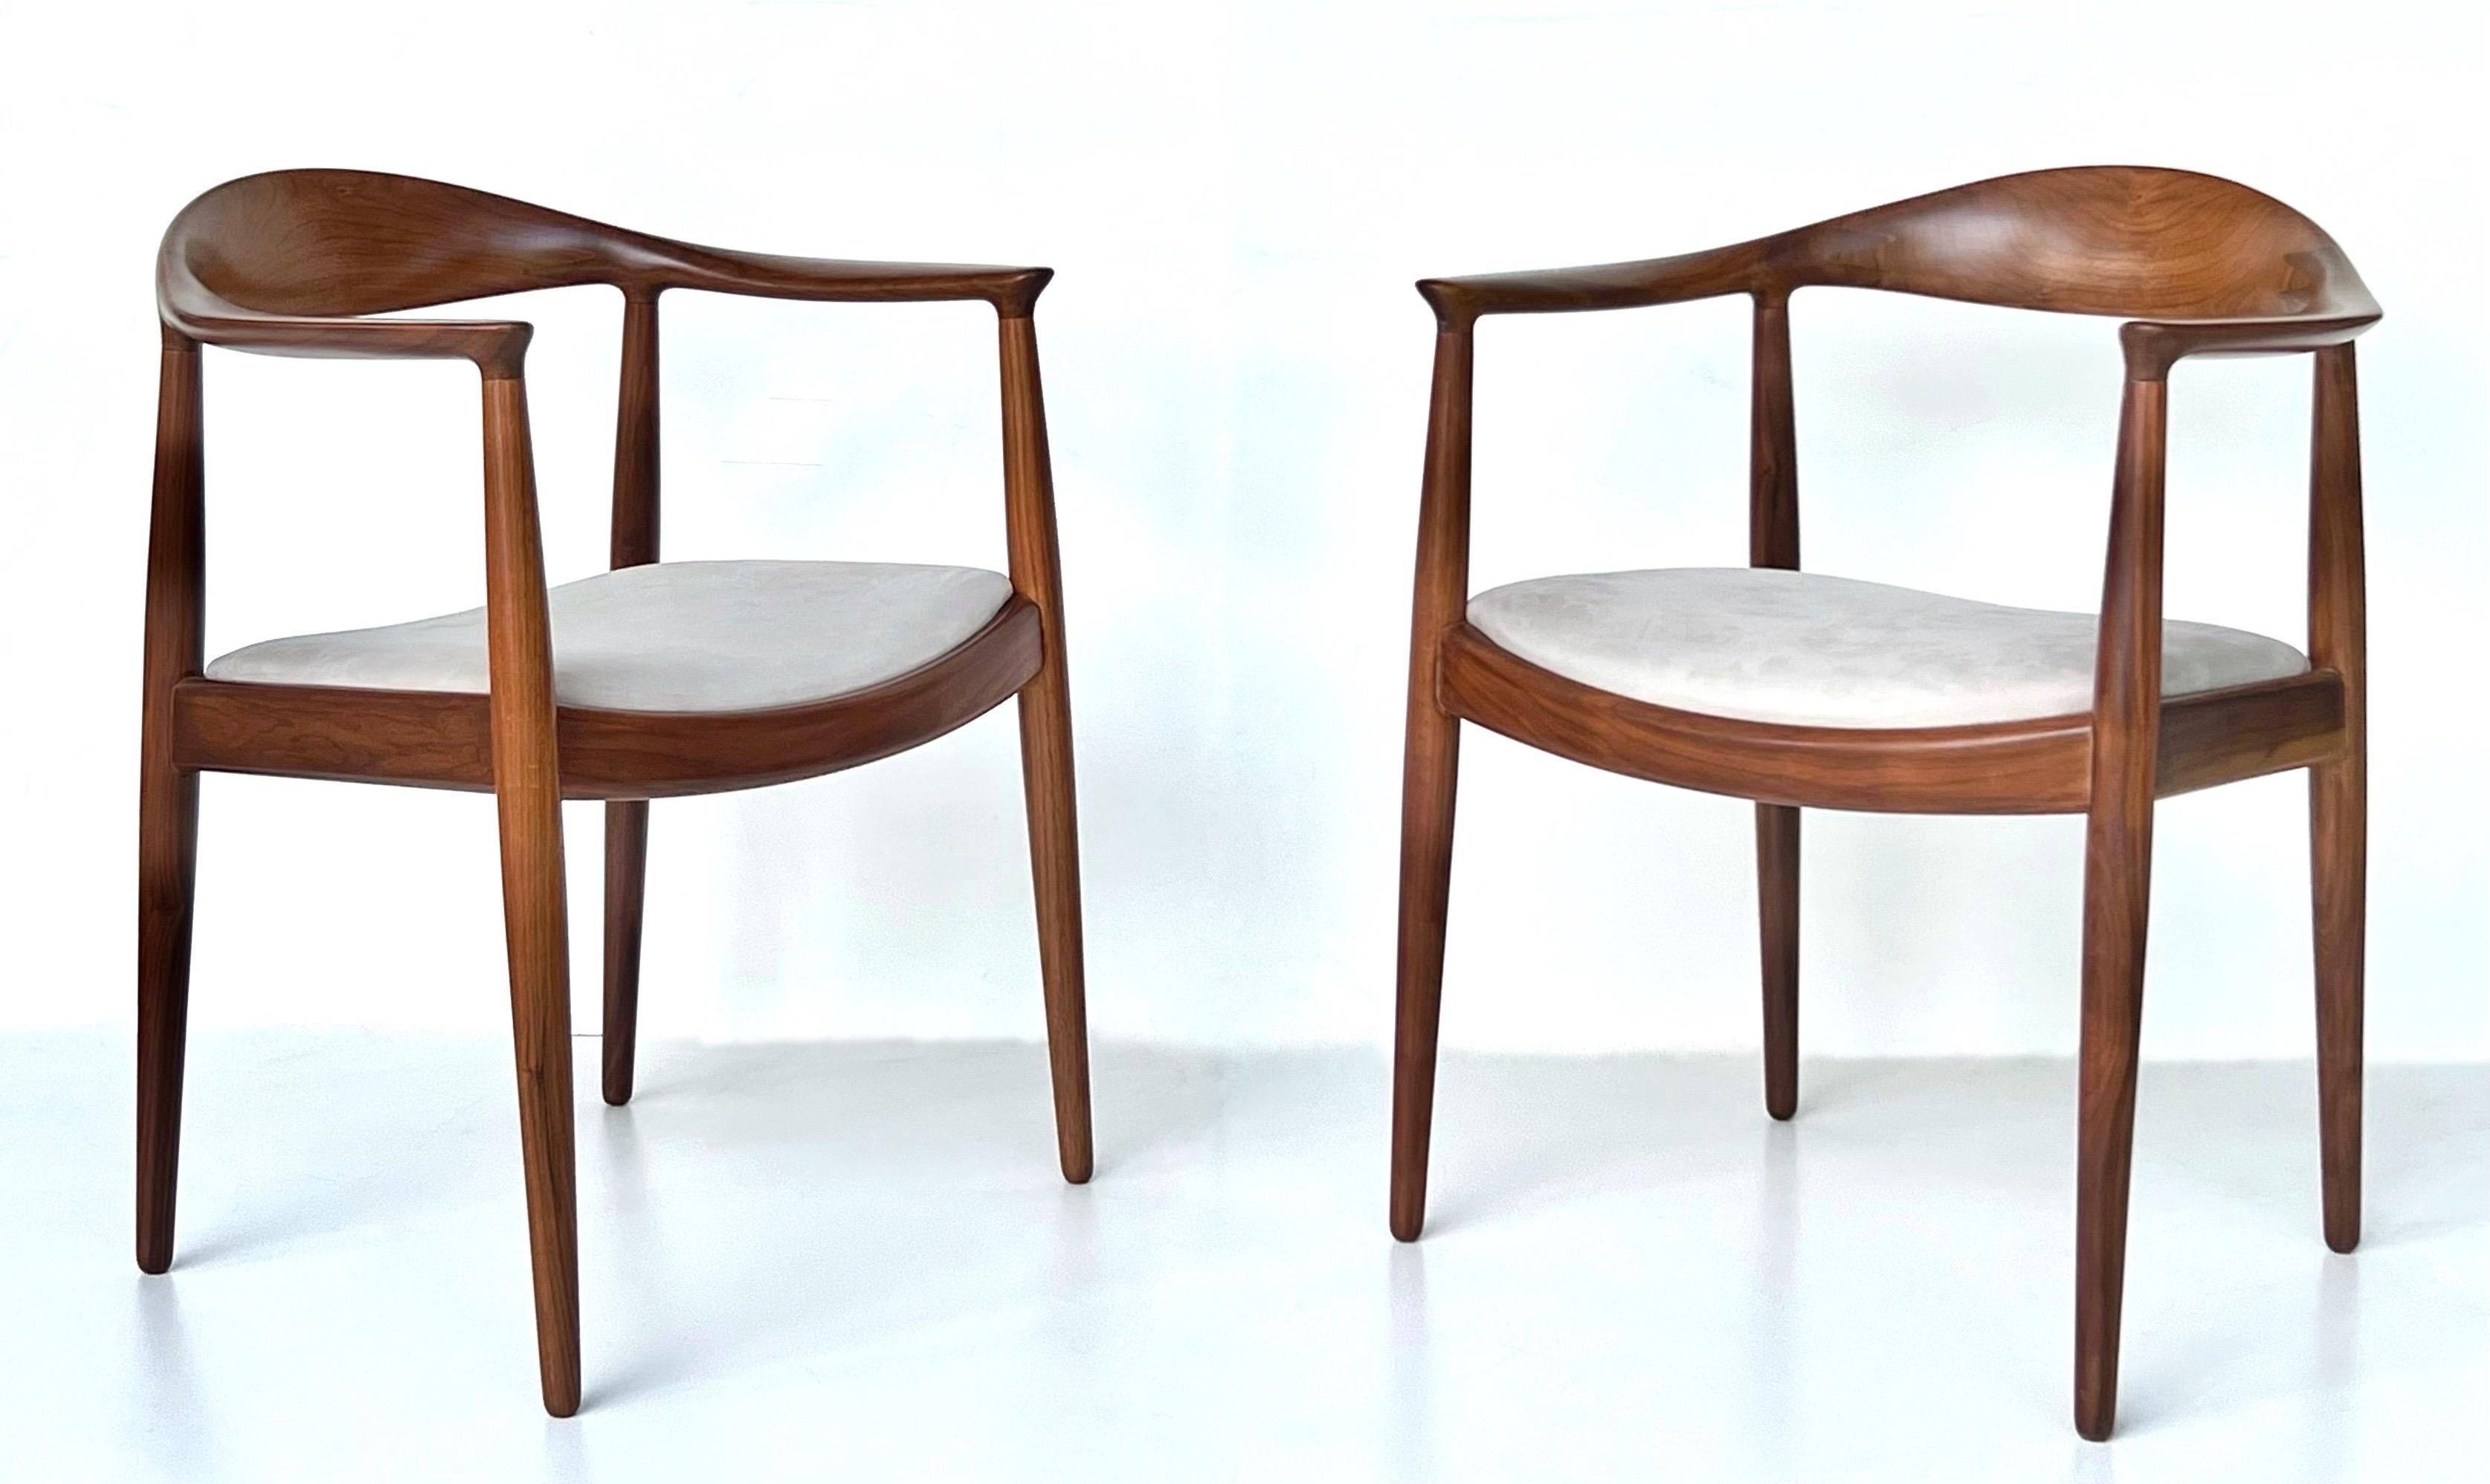 2 available, priced individually. 

A classic chair by Hans Wegner.
 Hans Wegner JH503, also known as 